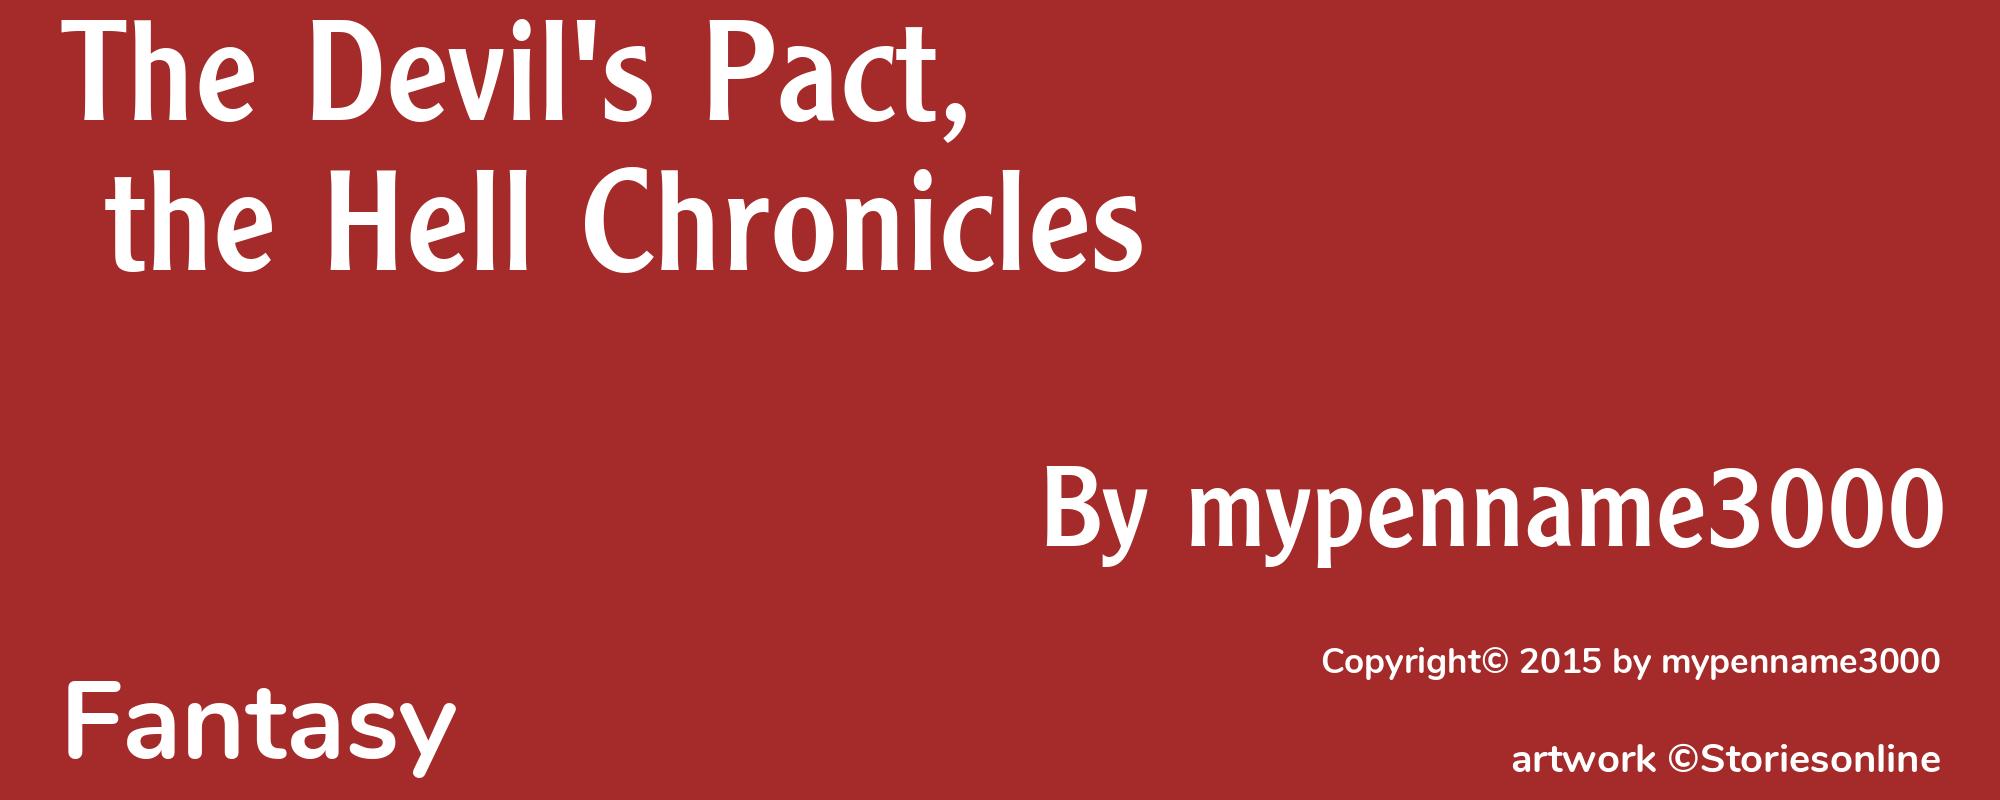 The Devil's Pact, the Hell Chronicles - Cover